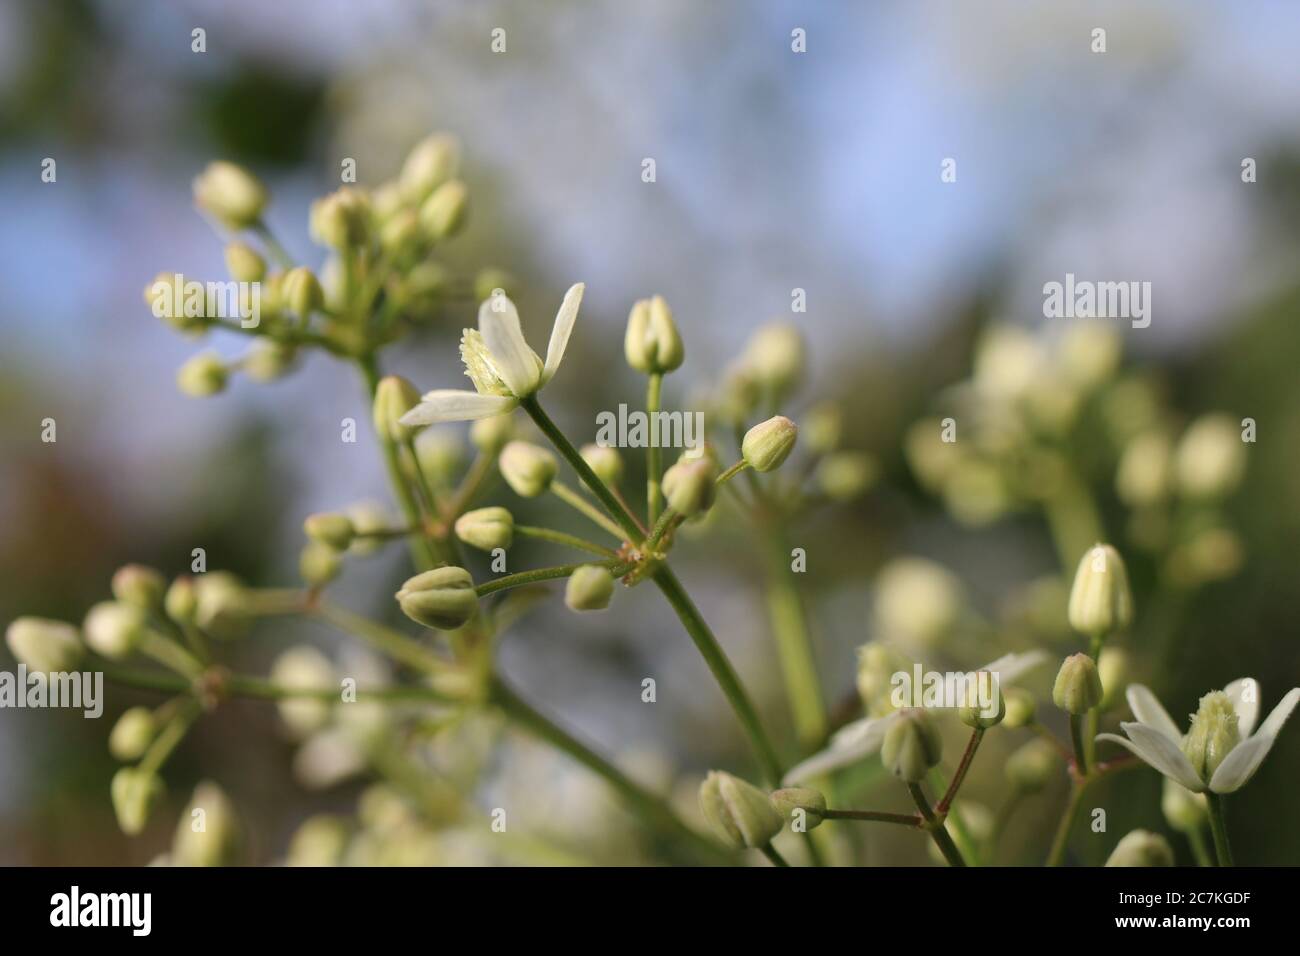 Closeup shot of green Clematis recta flowers on a blurred background Stock Photo